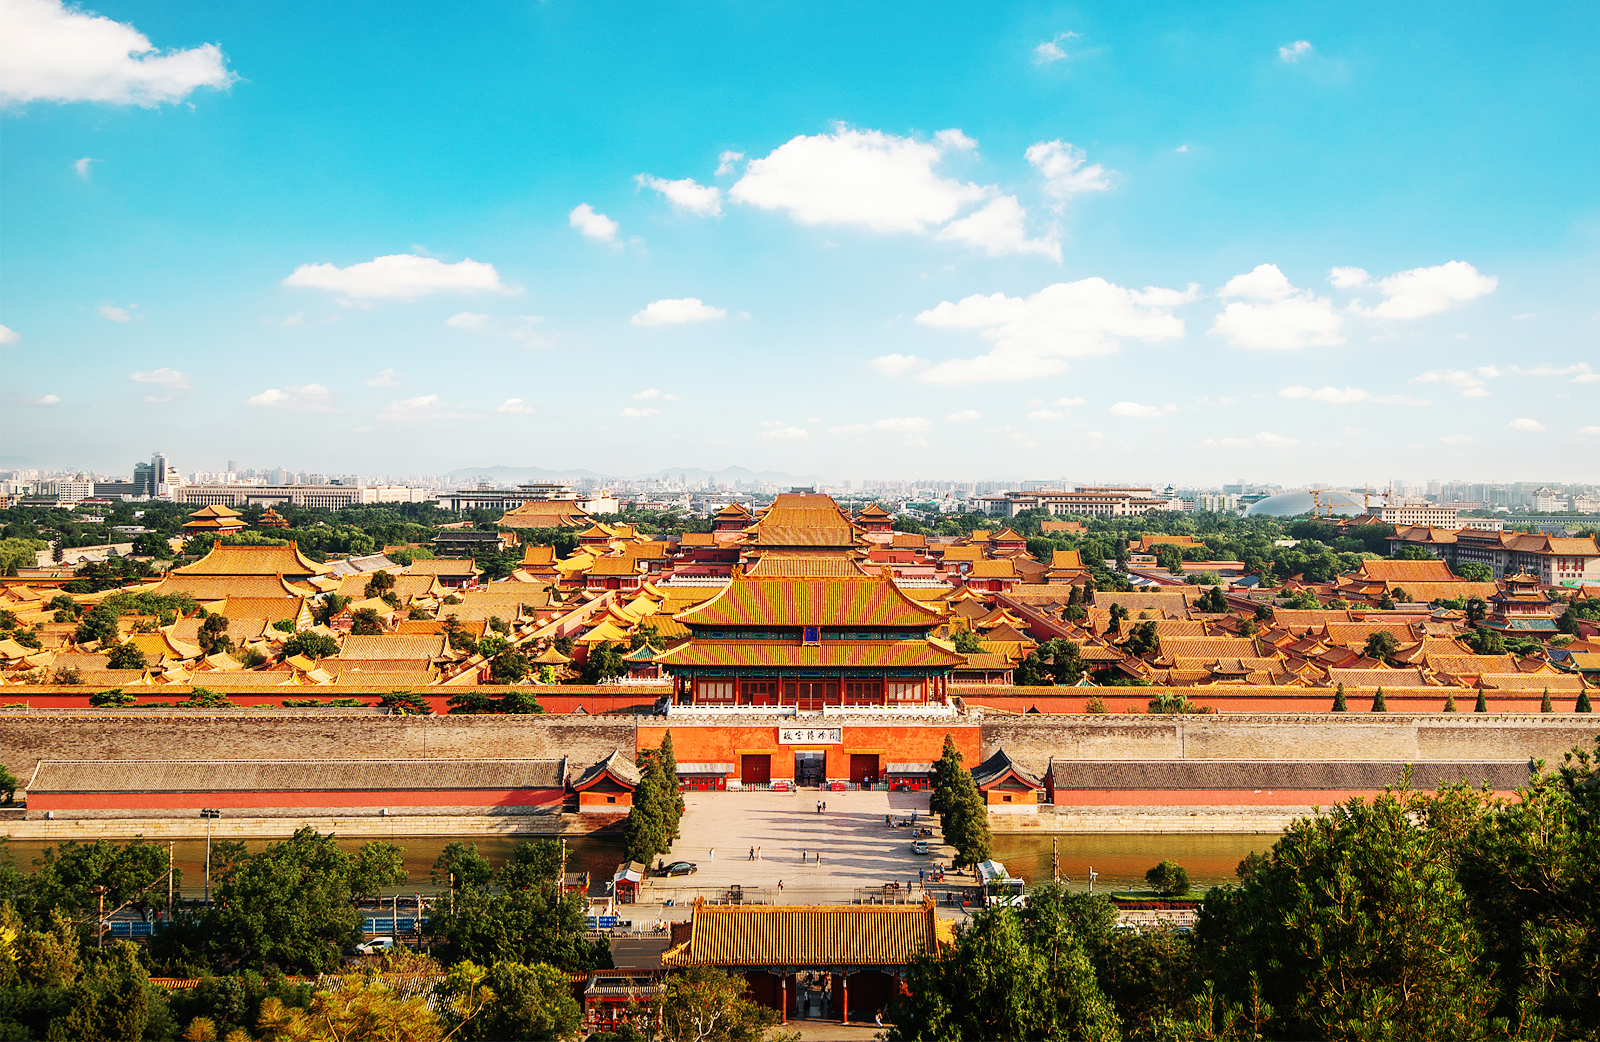 An aerial view of the Palace Museum, also known as the Forbidden City, situated along the Beijing Central Axis. /CFP